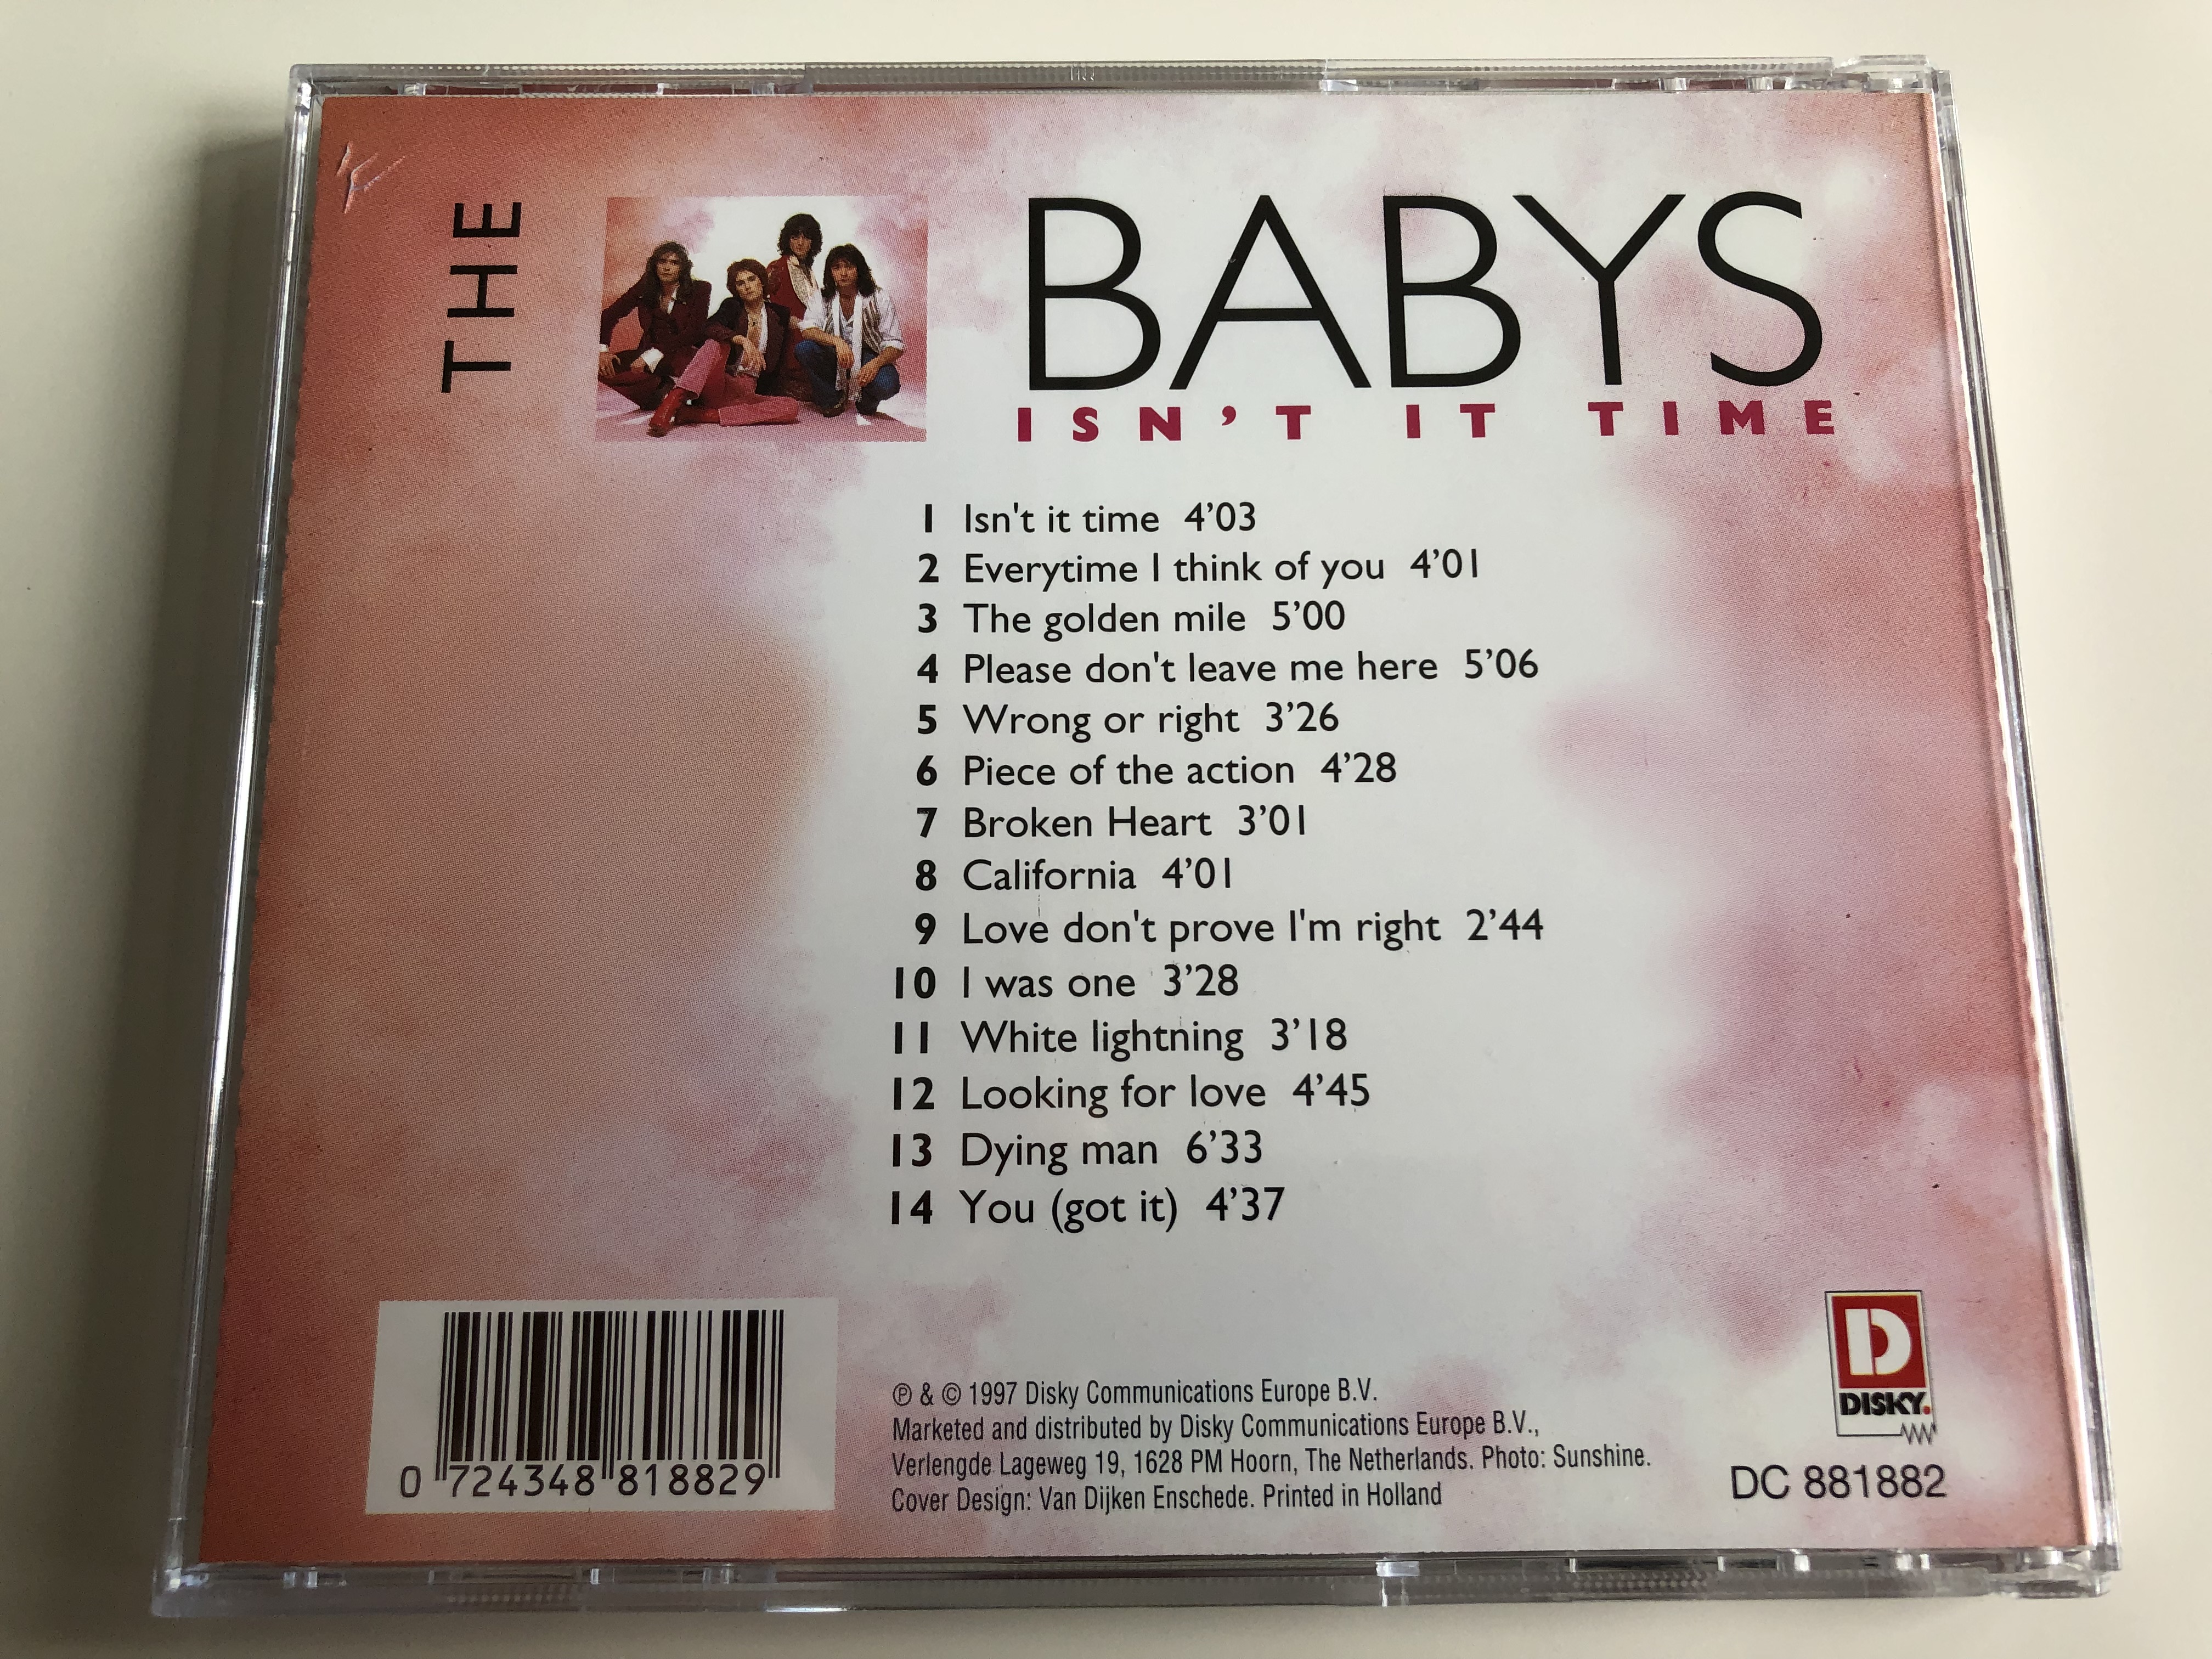 the-babys-isn-t-it-time-piece-of-the-action-everytime-i-think-of-you-white-lightning-disky-audio-cd-1997-dc-881882-4-.jpg